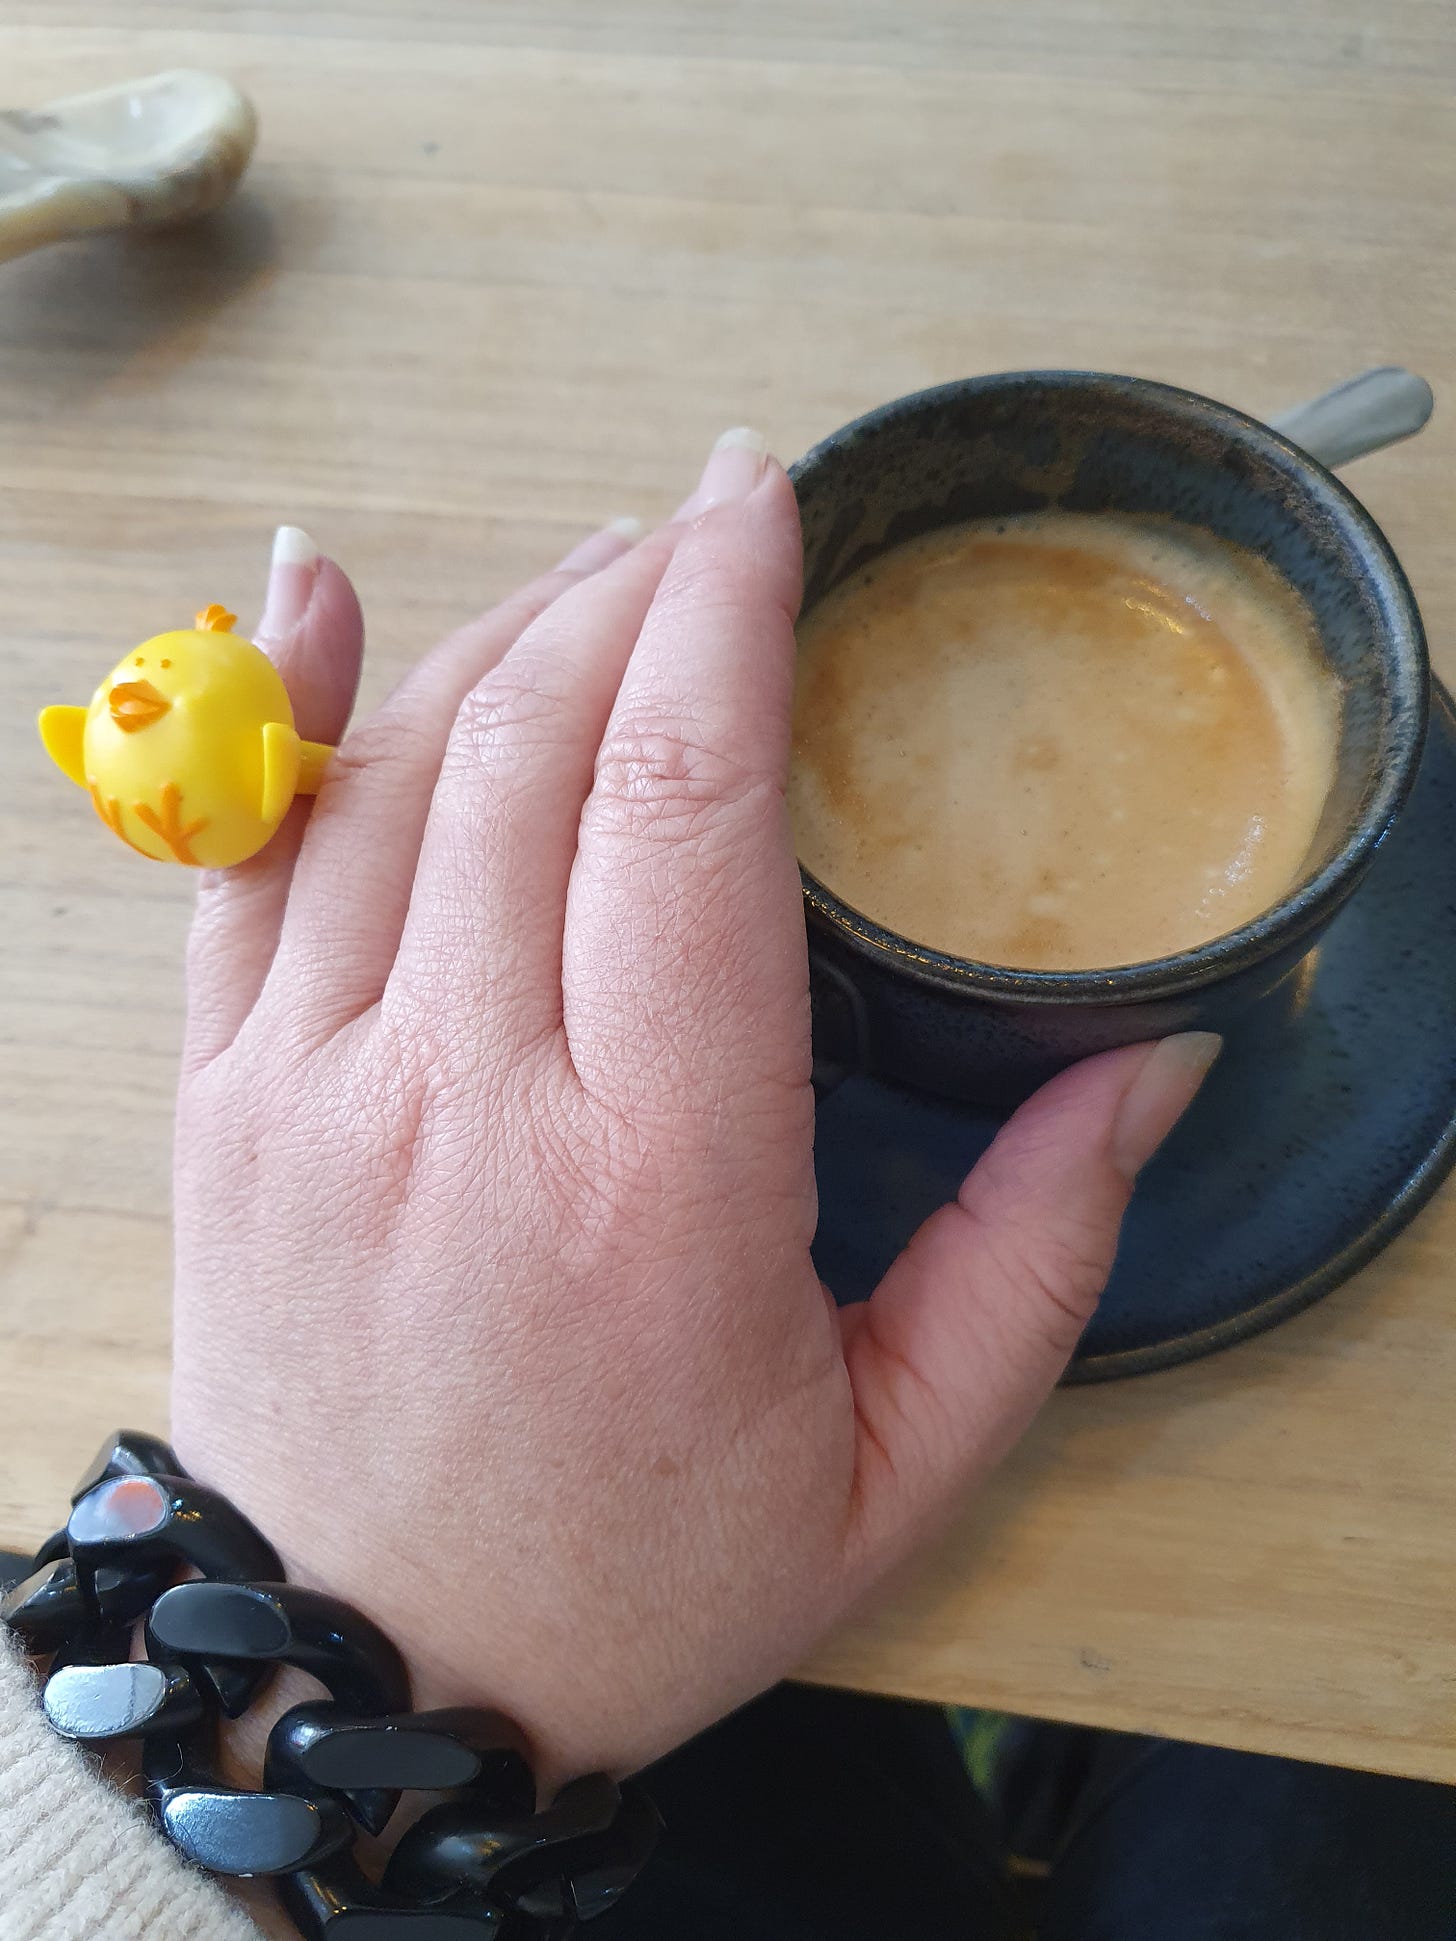 A hand wearing a large yellow plastic chick ring that is too small and holding a cup of coffee.